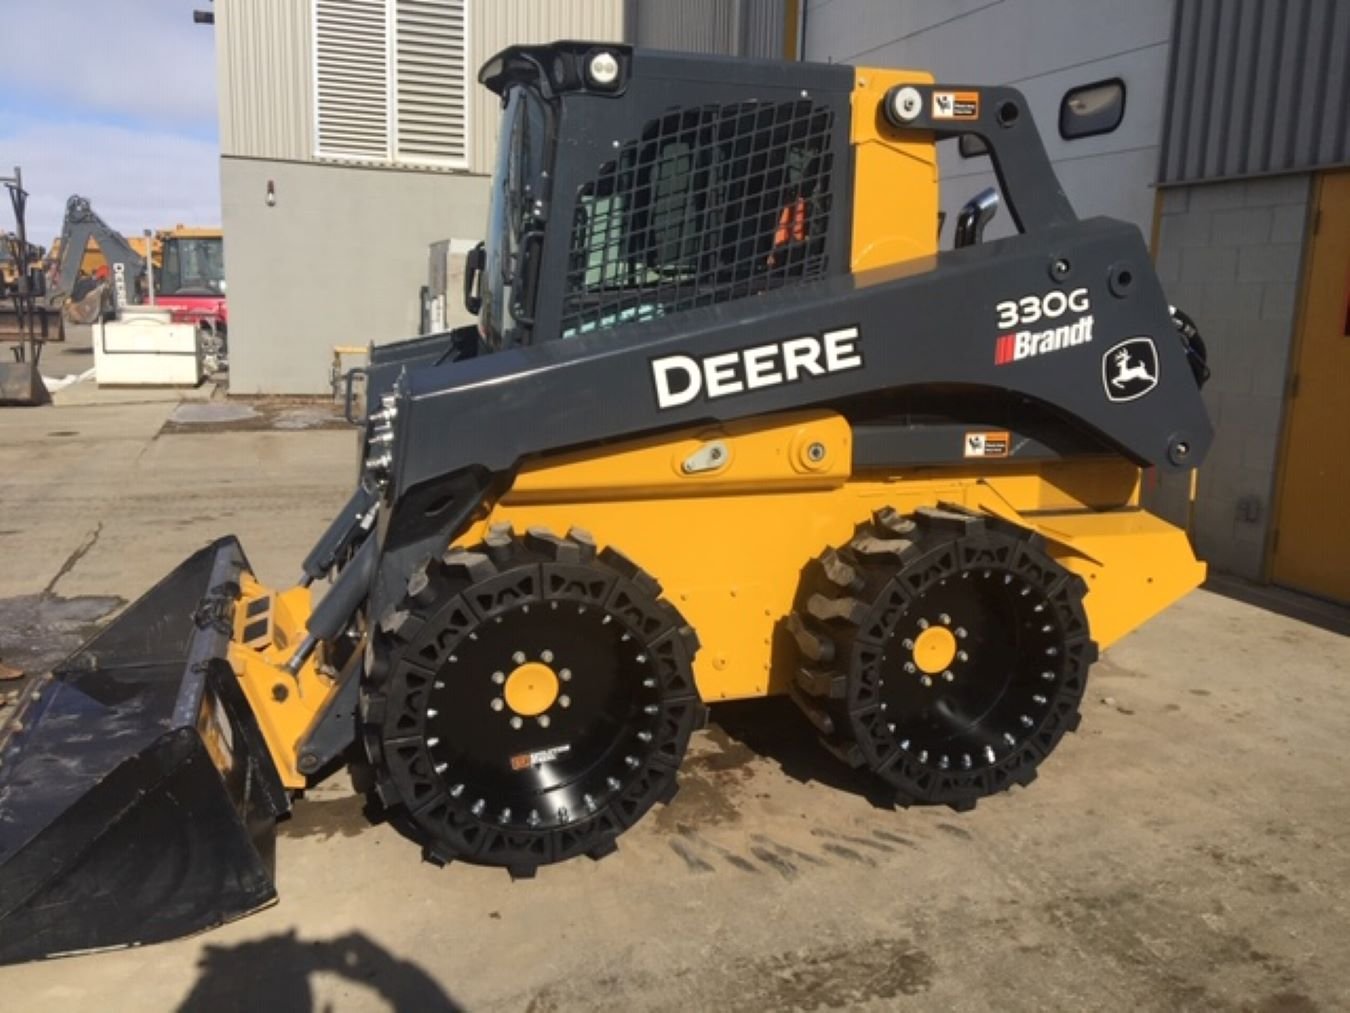 This image shows a Deere 330G skid steer using our Bobcat all terrain skid steer tires